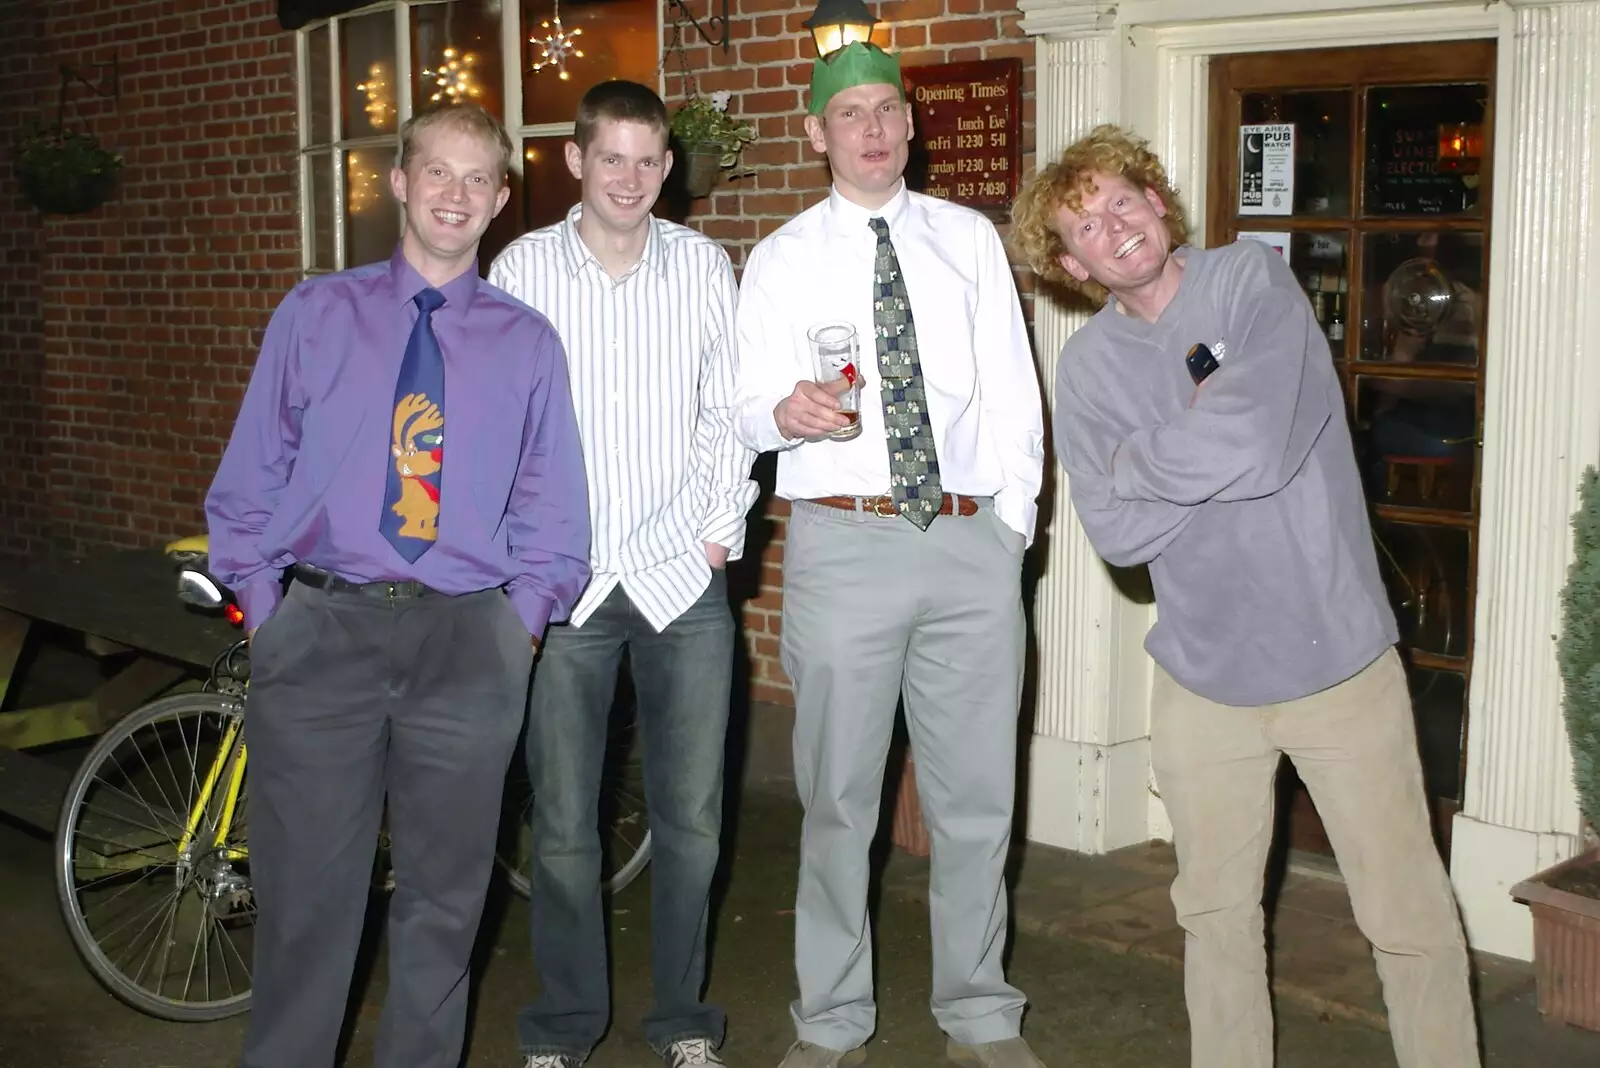 A group photo of the lads, from The BSCC Annual Dinner, The Brome Swan, Suffolk - 4th December 2004